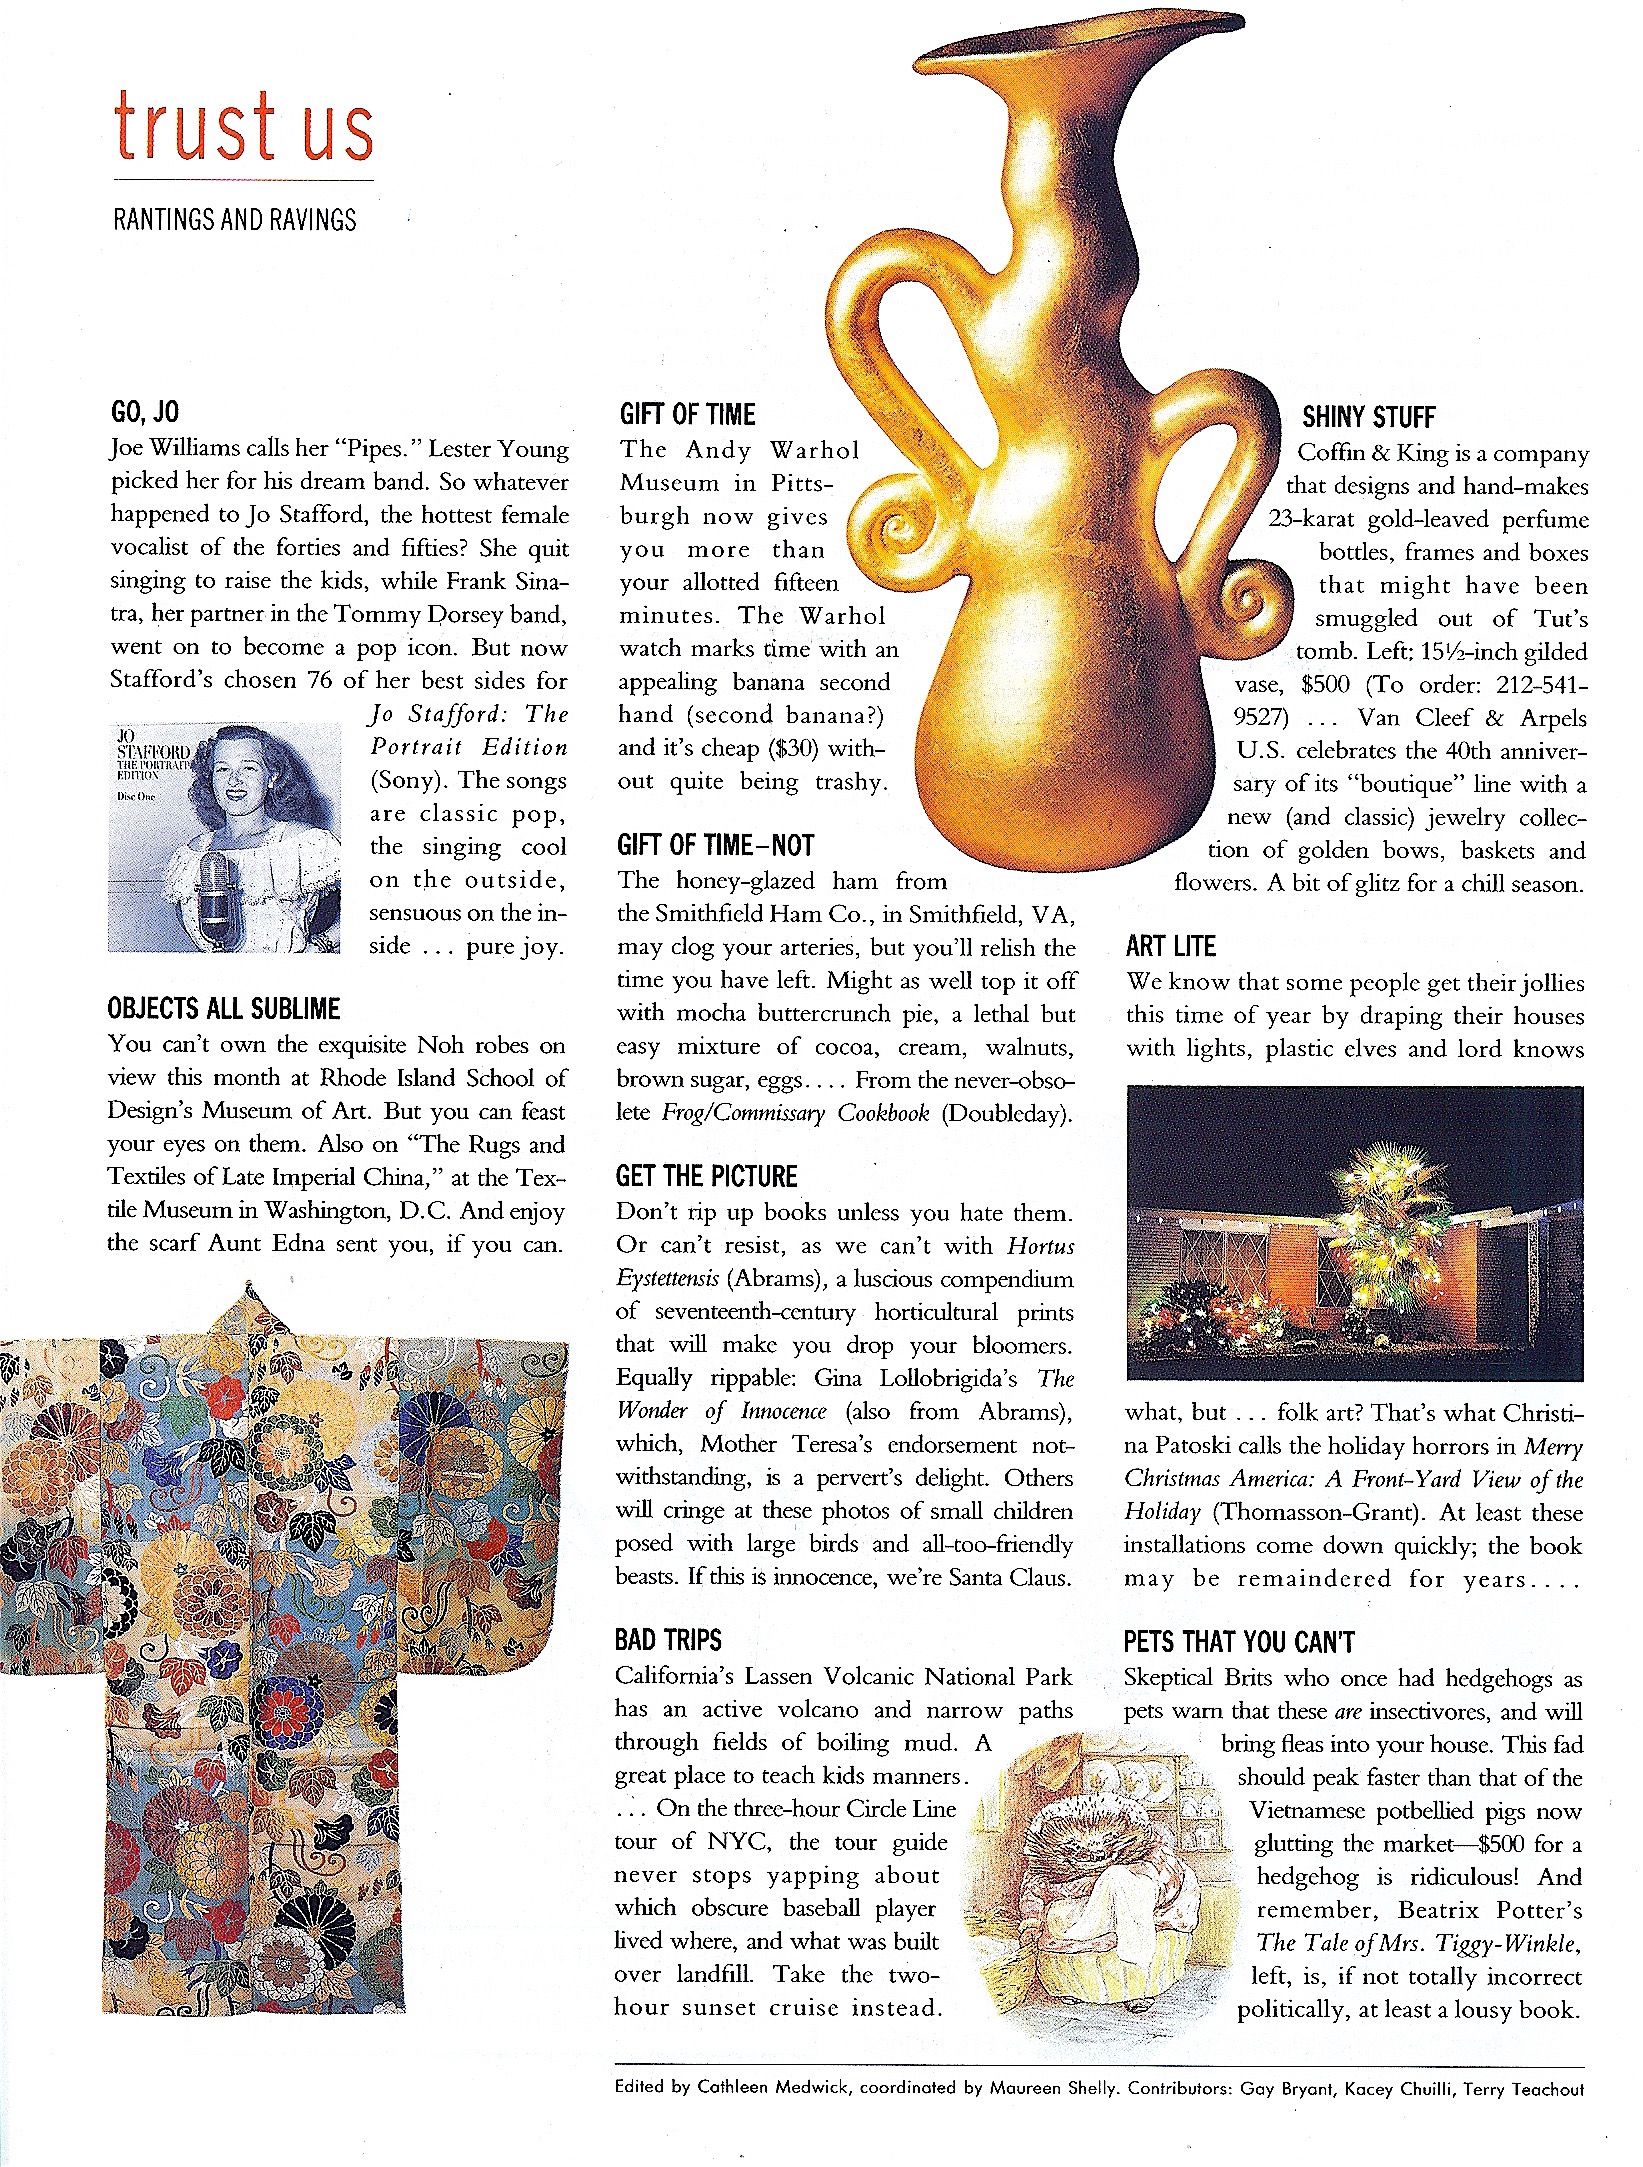 Coffin & King Press - Coffin & King Gilded Vase featured in Mirabella